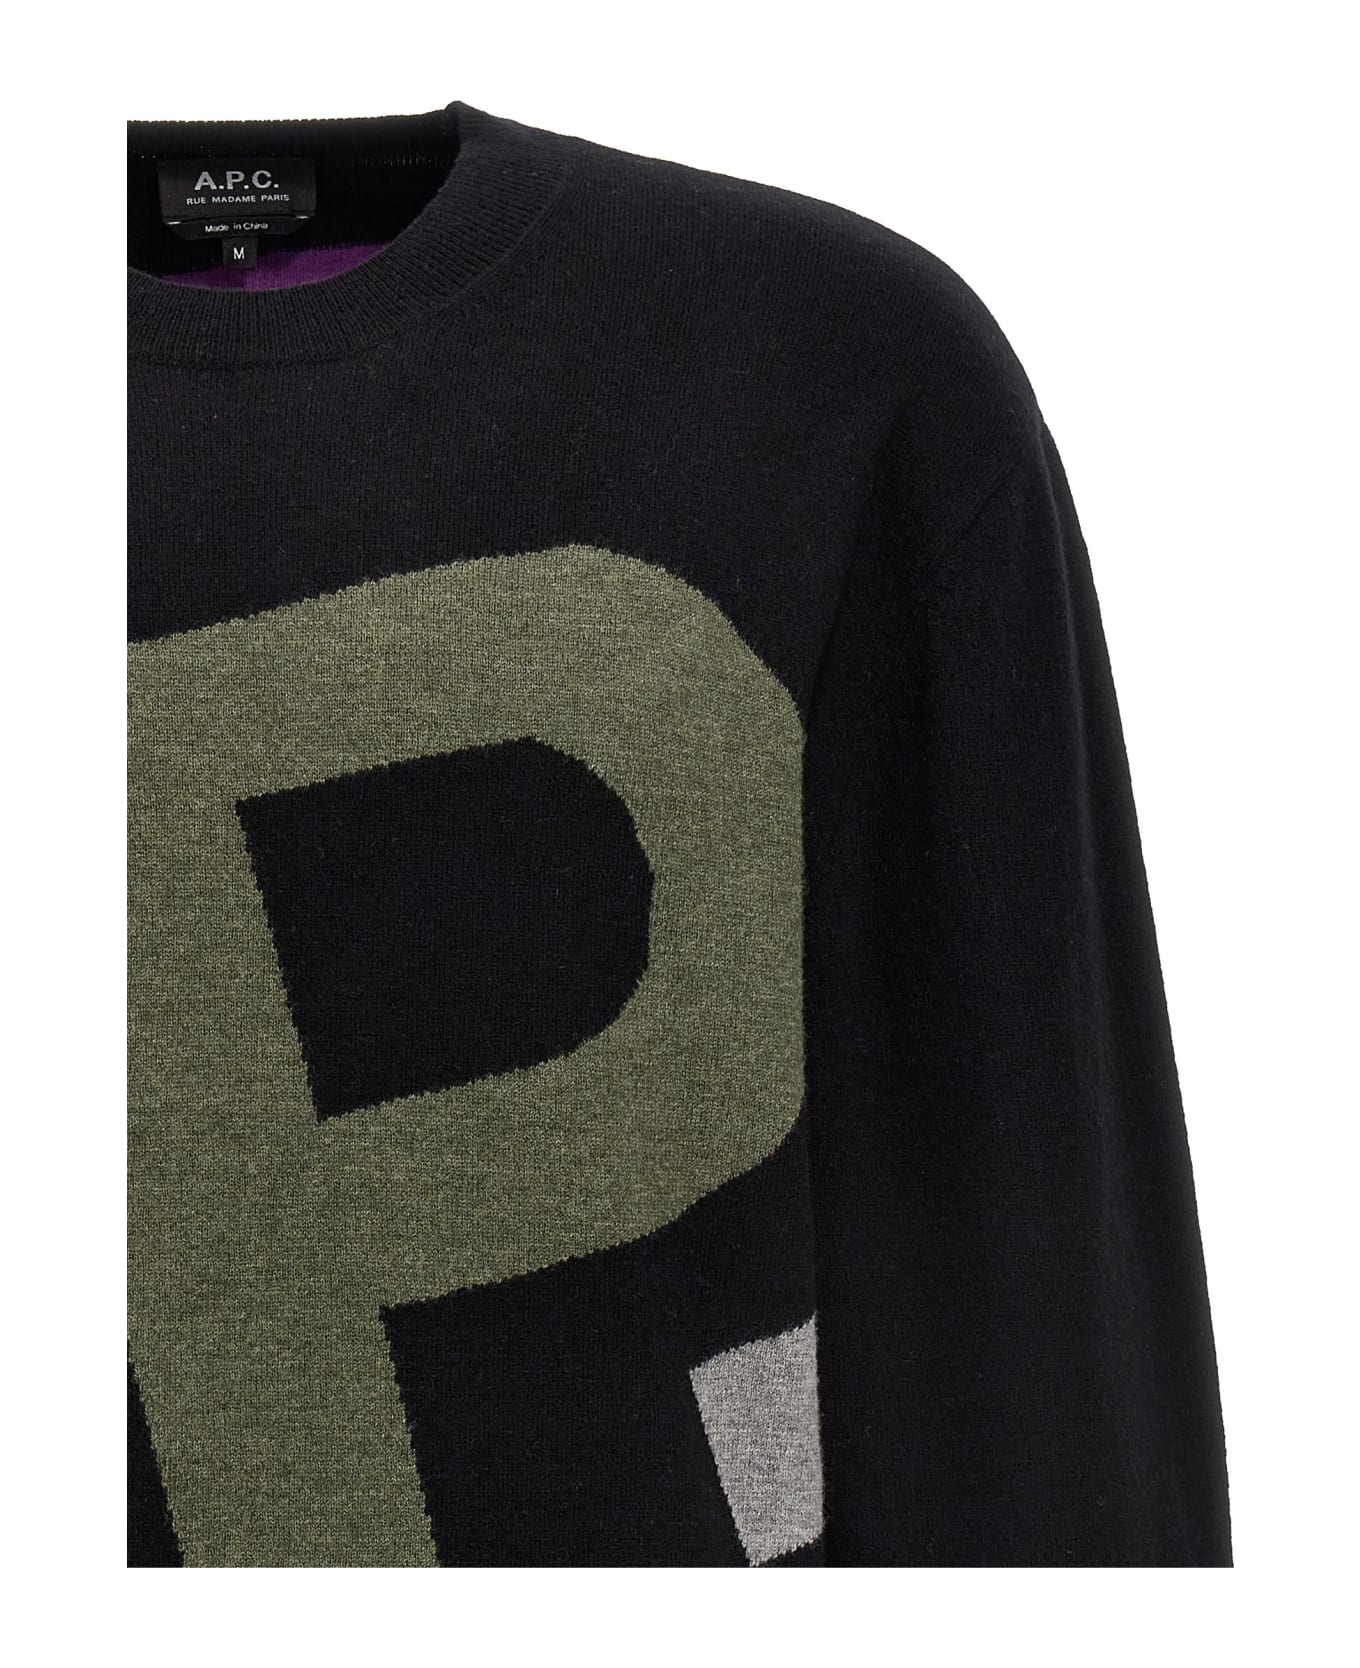 A.P.C. Logo All Over Sweater - BLACK フリース